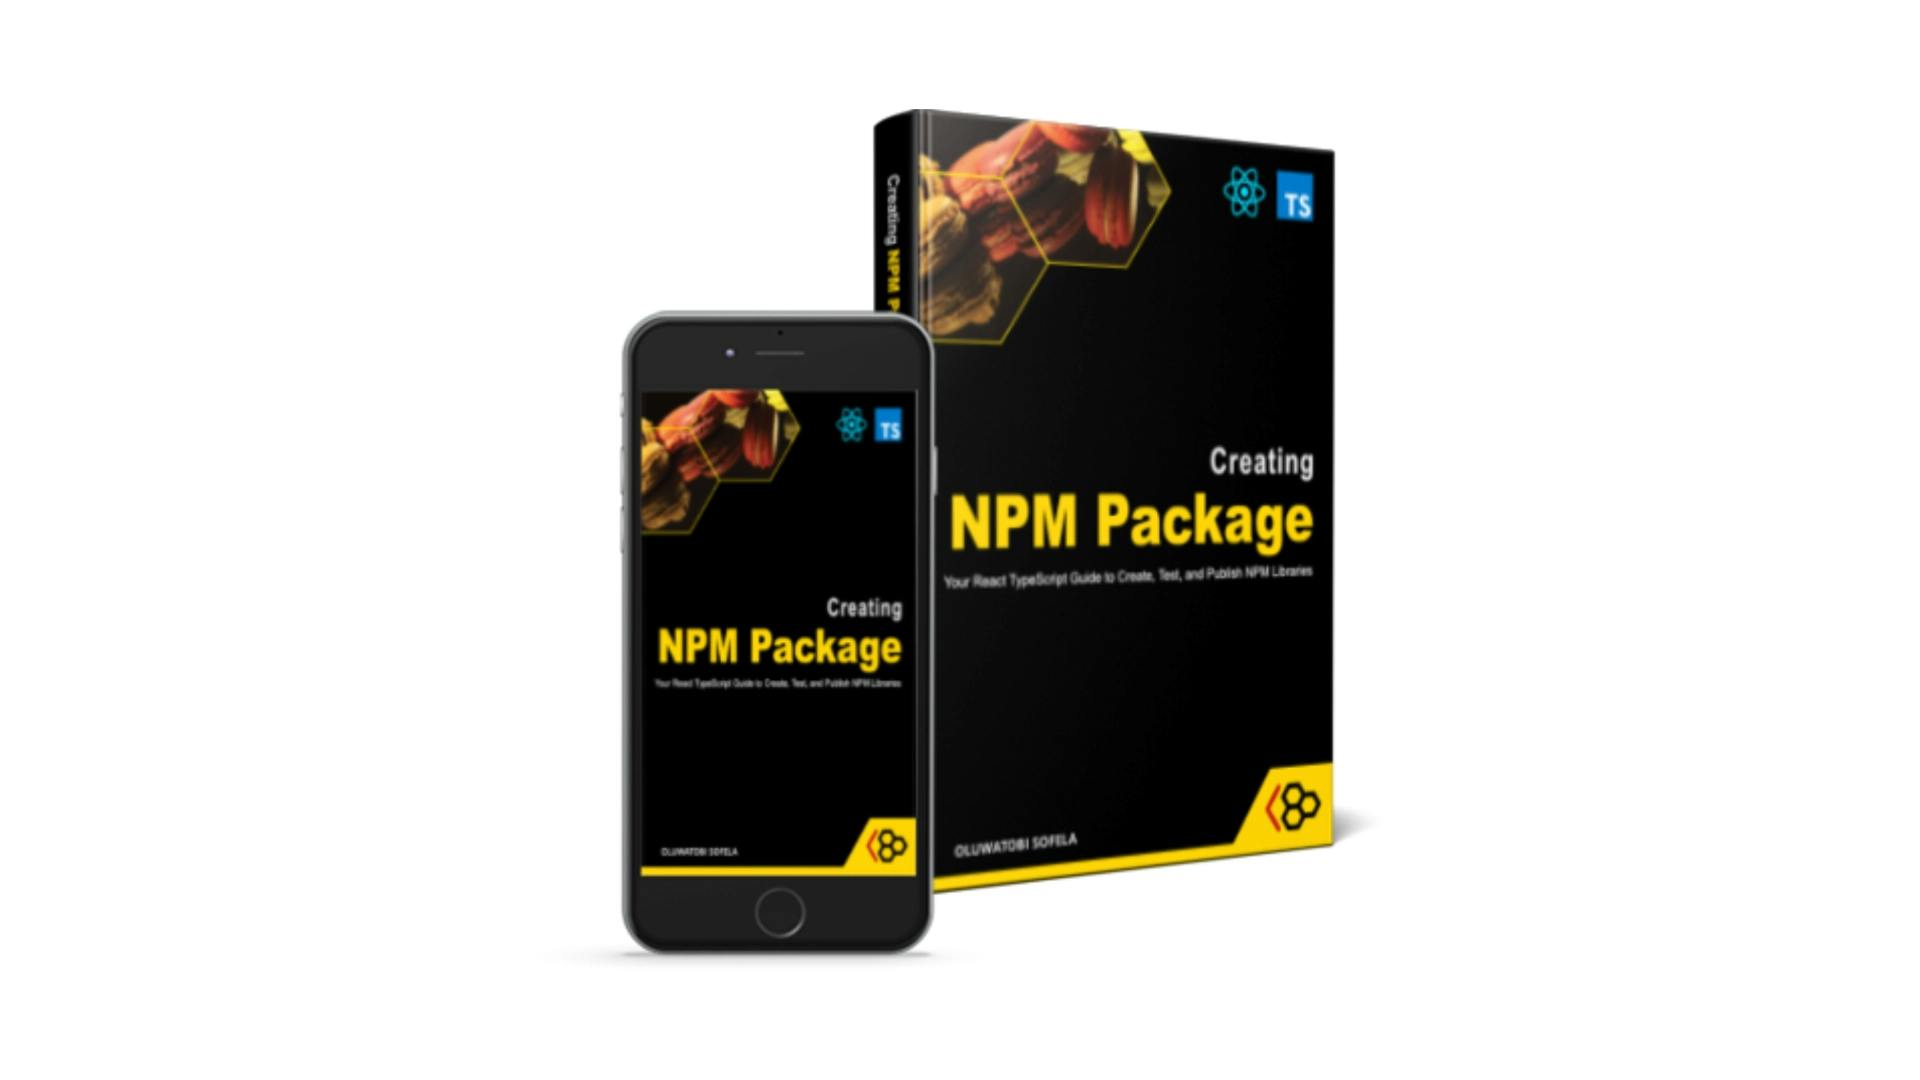 The Creating NPM Package book's image